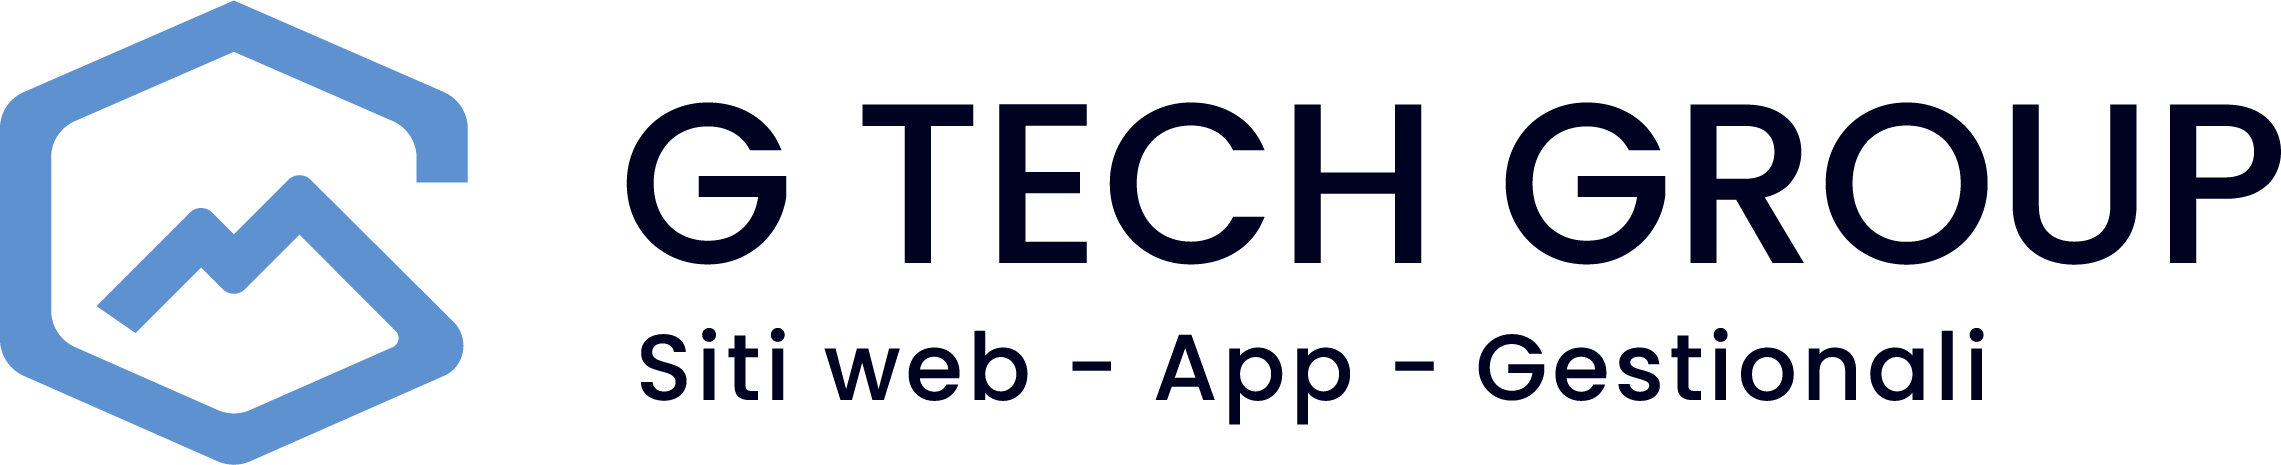 Gtechgroup.es Whois Information